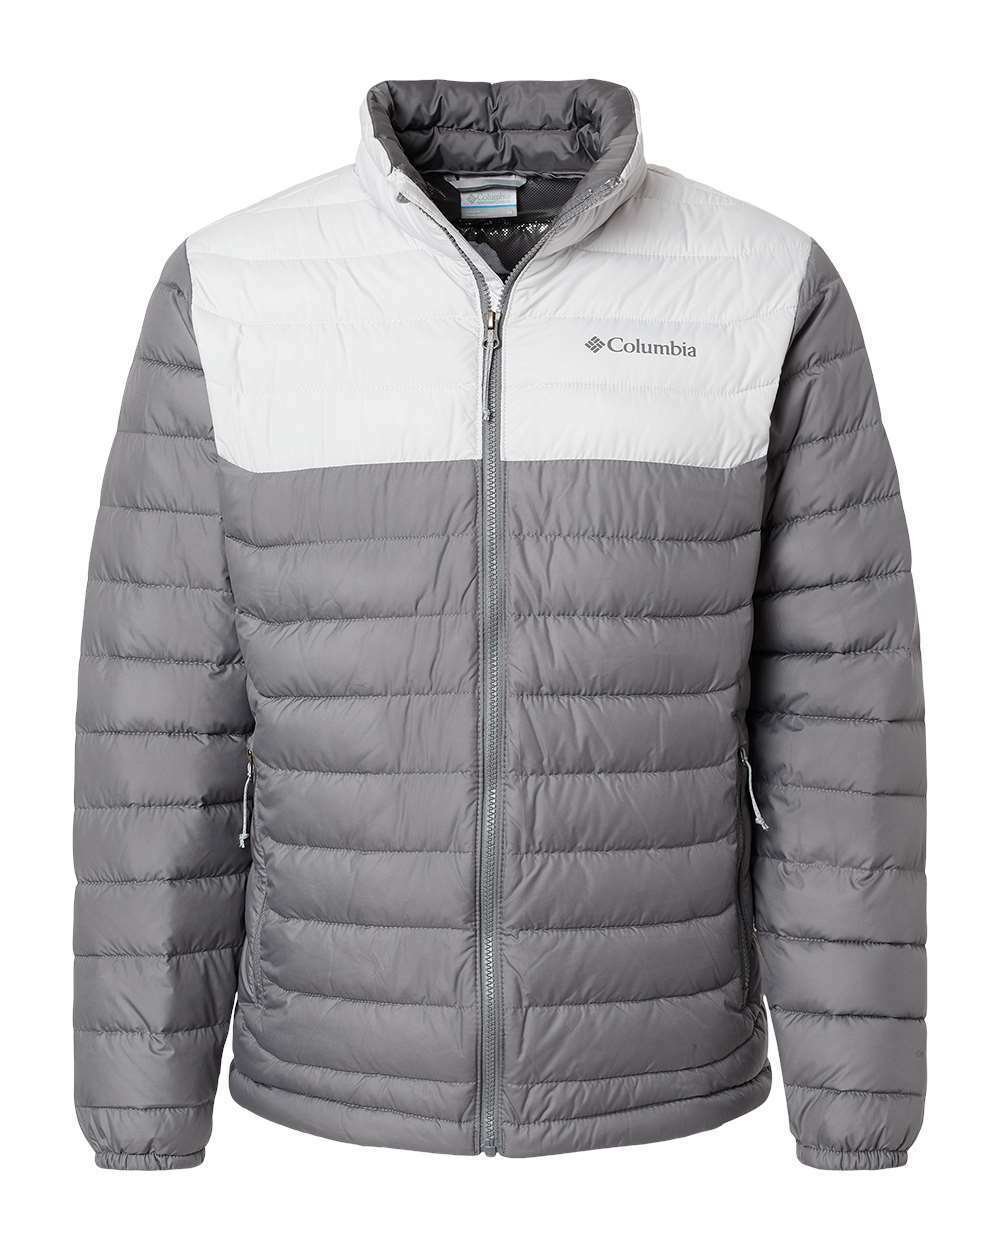 Columbia - Powder Lite Jacket with Omni-Heat thermal reflective lining -  169800